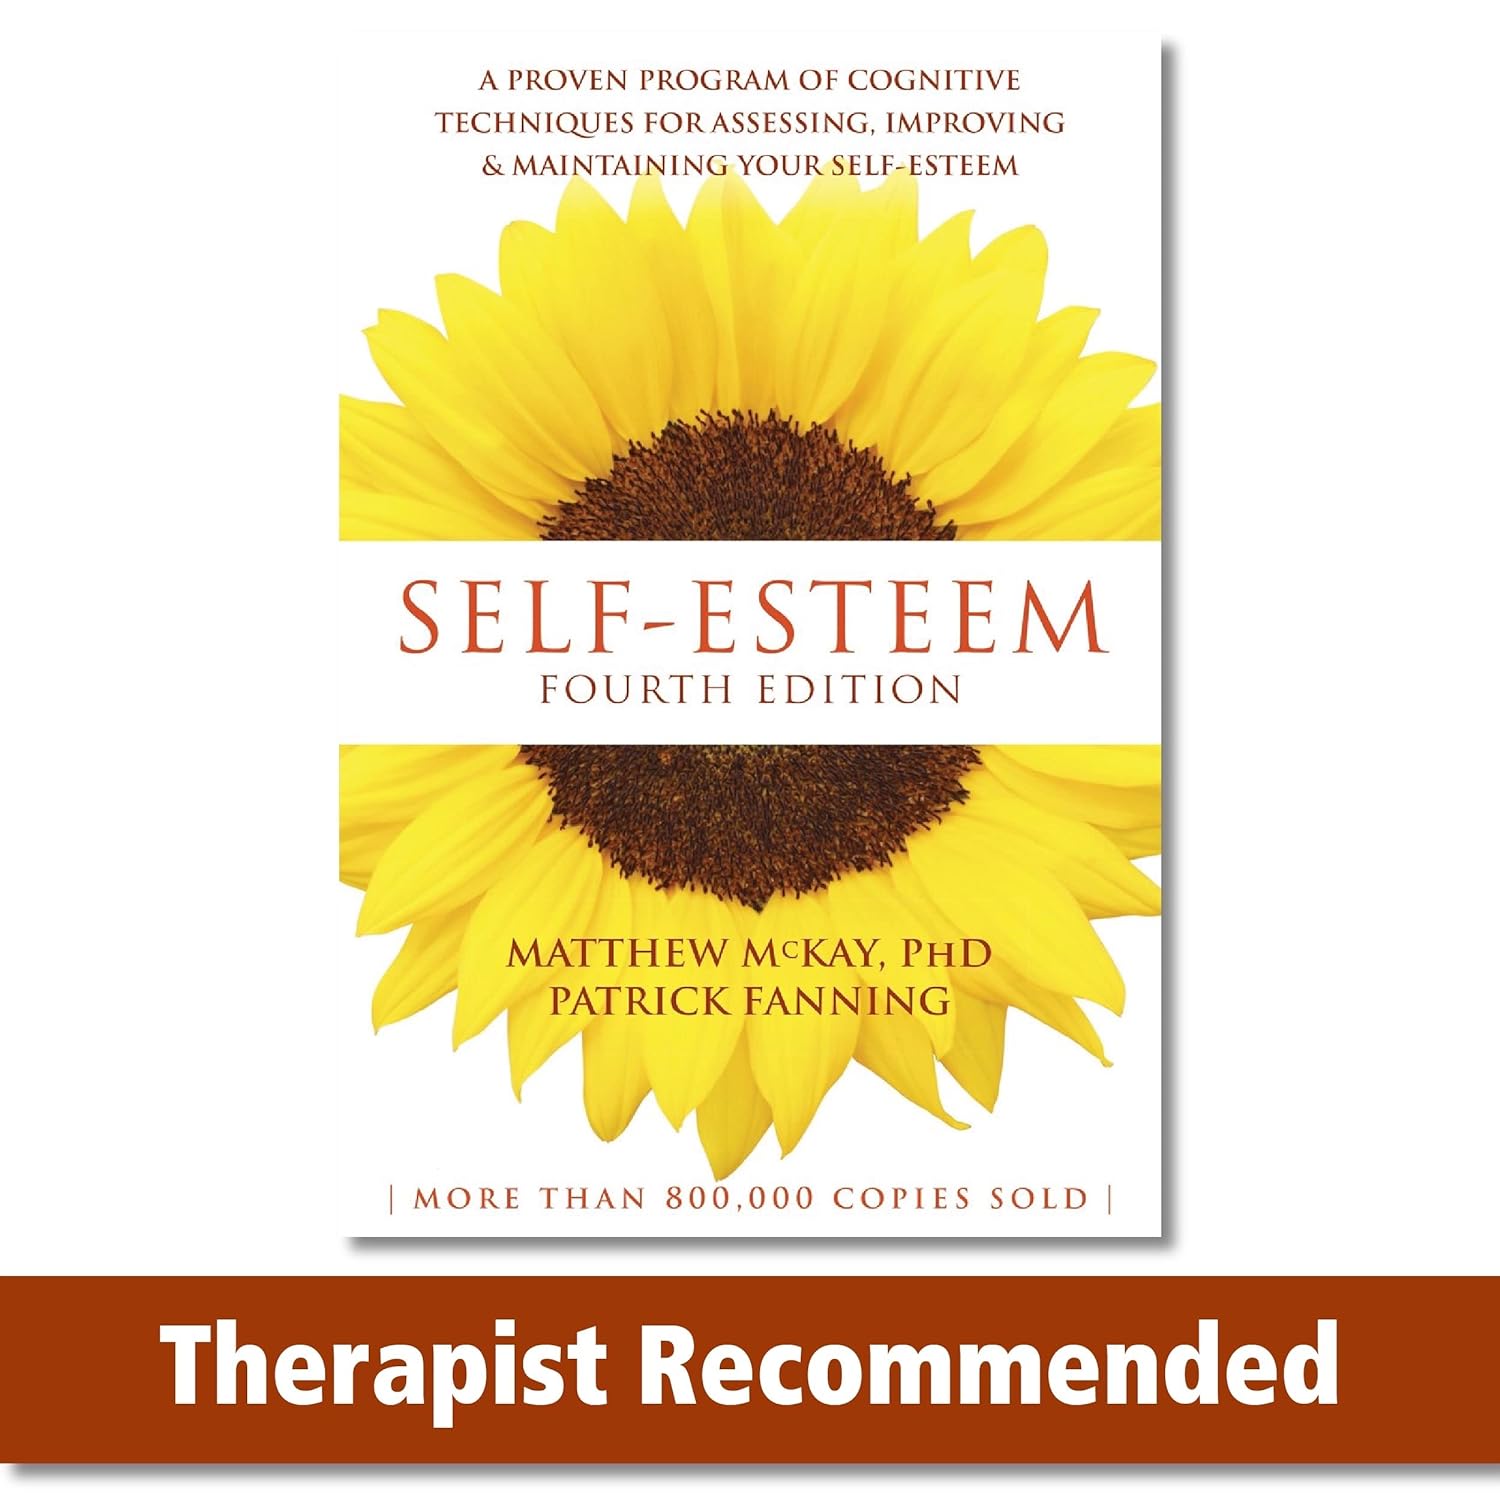 Book Cover - Self-Esteem, 4th Edition By Matthew McKay and Patrick Fanning